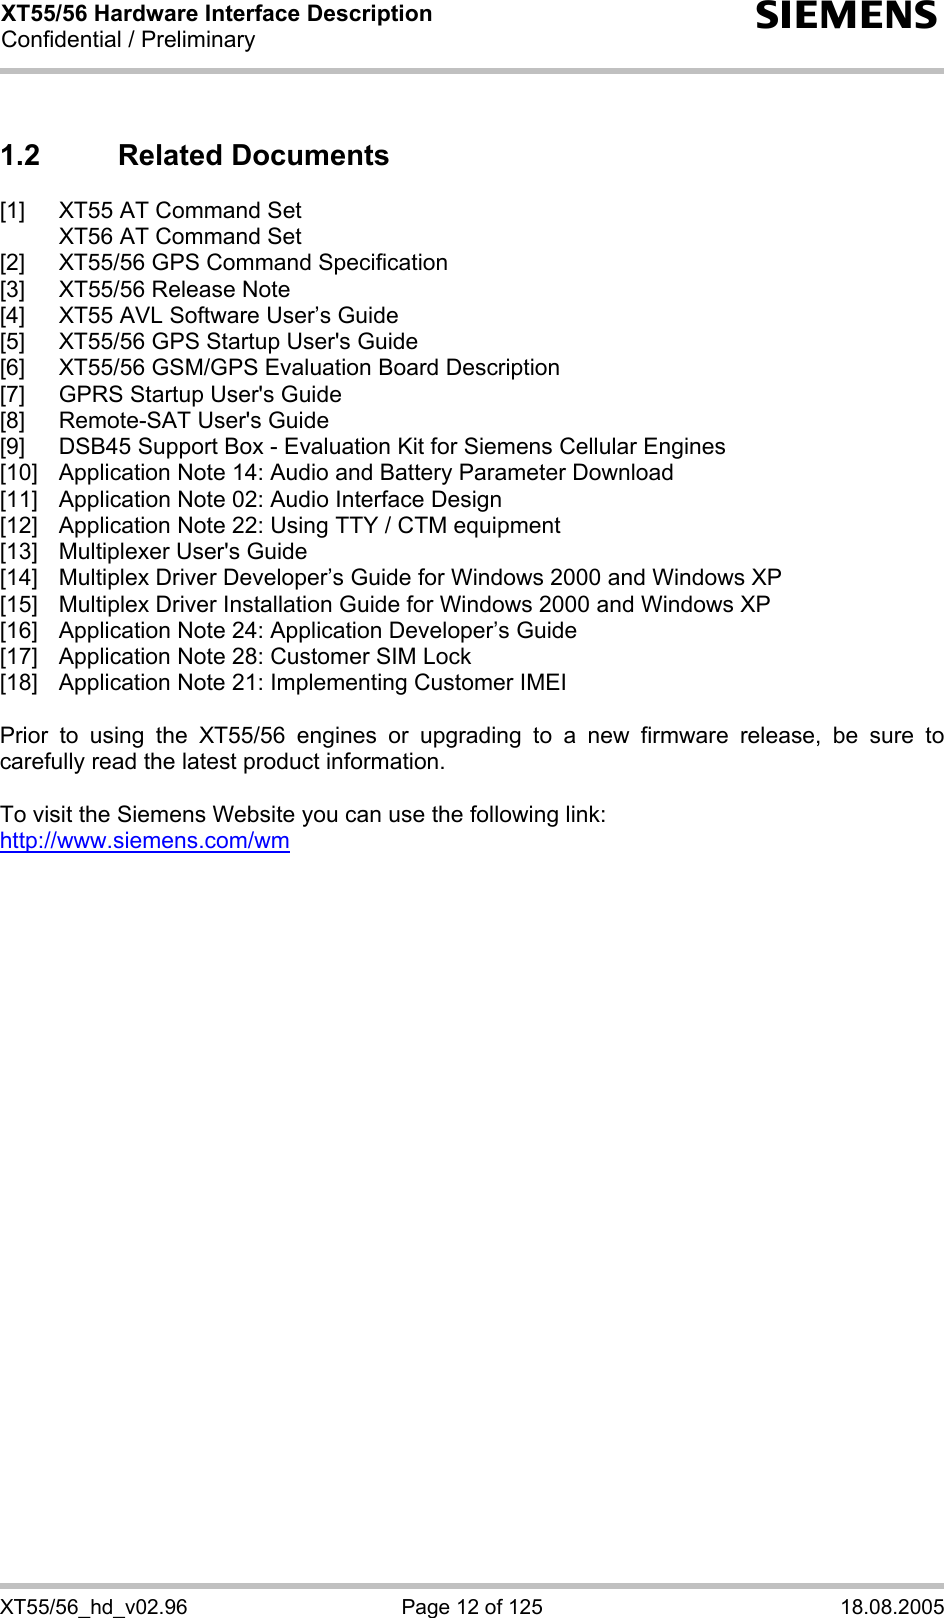 XT55/56 Hardware Interface Description Confidential / Preliminary s XT55/56_hd_v02.96  Page 12 of 125  18.08.2005 1.2 Related Documents [1]  XT55 AT Command Set   XT56 AT Command Set [2]  XT55/56 GPS Command Specification [3]  XT55/56 Release Note [4]  XT55 AVL Software User’s Guide [5]  XT55/56 GPS Startup User&apos;s Guide [6]  XT55/56 GSM/GPS Evaluation Board Description [7]  GPRS Startup User&apos;s Guide [8]  Remote-SAT User&apos;s Guide [9]  DSB45 Support Box - Evaluation Kit for Siemens Cellular Engines [10]  Application Note 14: Audio and Battery Parameter Download  [11]  Application Note 02: Audio Interface Design  [12]  Application Note 22: Using TTY / CTM equipment  [13]  Multiplexer User&apos;s Guide [14]  Multiplex Driver Developer’s Guide for Windows 2000 and Windows XP [15]  Multiplex Driver Installation Guide for Windows 2000 and Windows XP [16]  Application Note 24: Application Developer’s Guide [17]  Application Note 28: Customer SIM Lock [18]  Application Note 21: Implementing Customer IMEI  Prior to using the XT55/56 engines or upgrading to a new firmware release, be sure to carefully read the latest product information.  To visit the Siemens Website you can use the following link: http://www.siemens.com/wm   